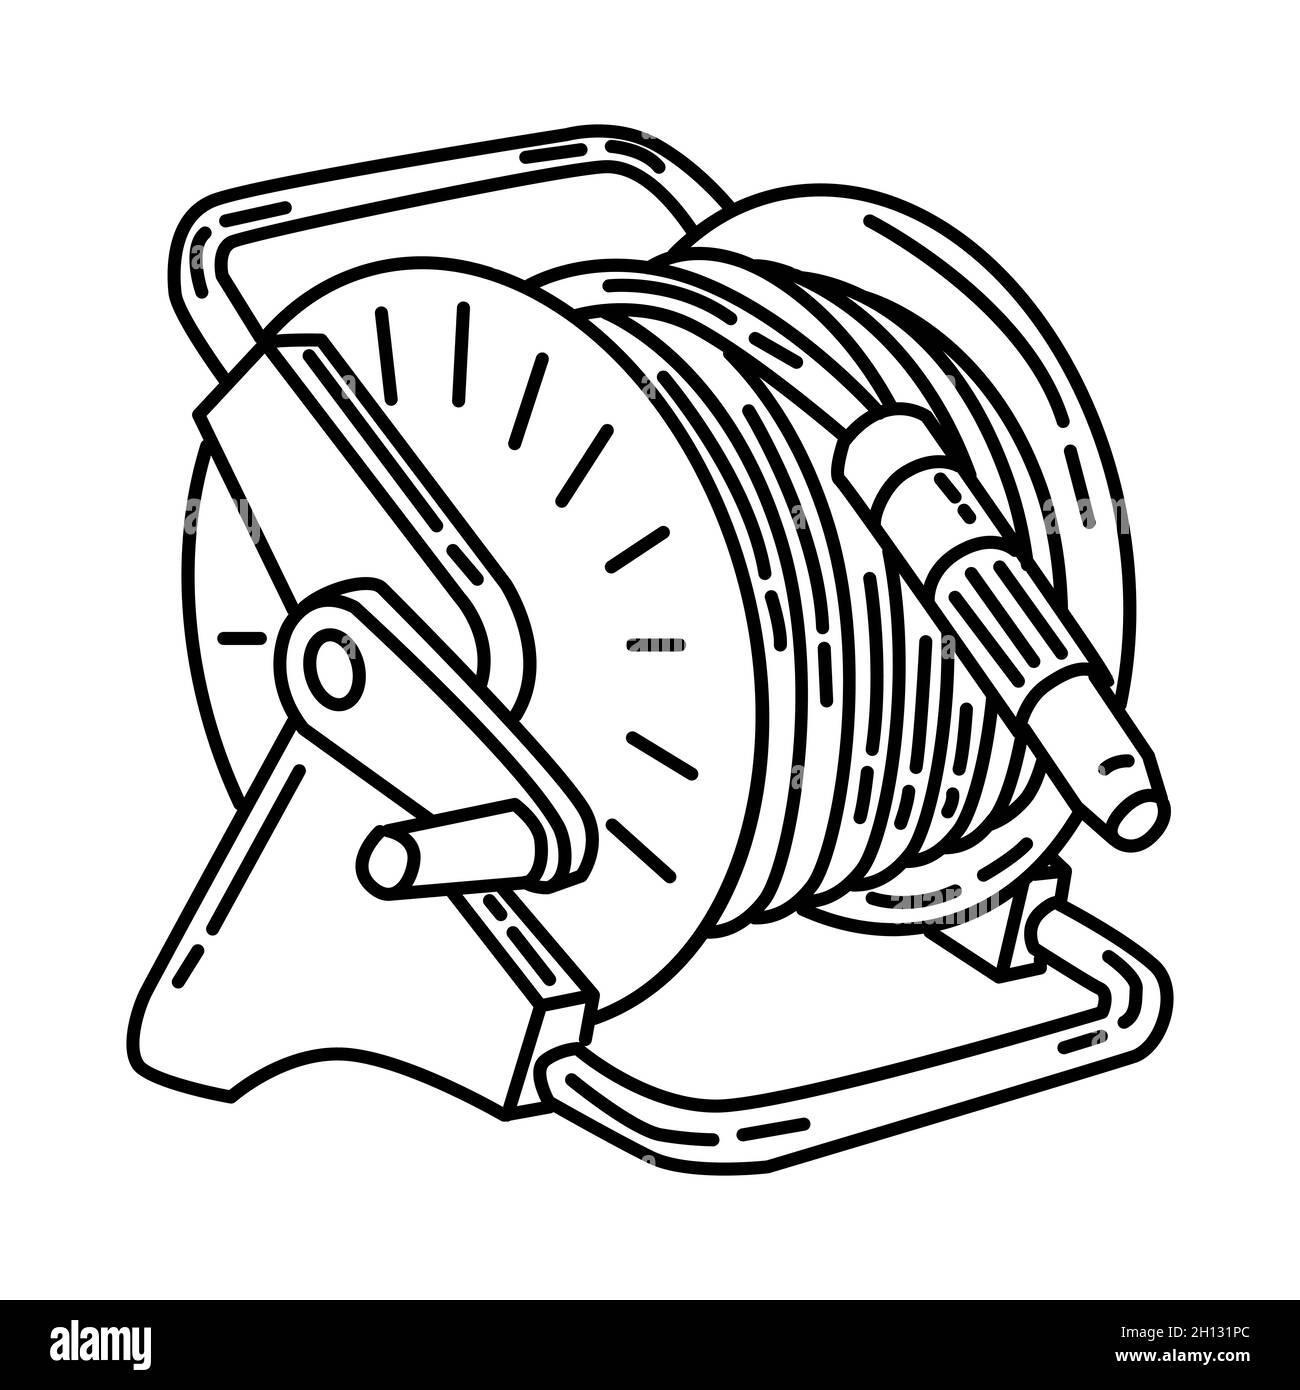 Hose reel Black and White Stock Photos & Images - Alamy